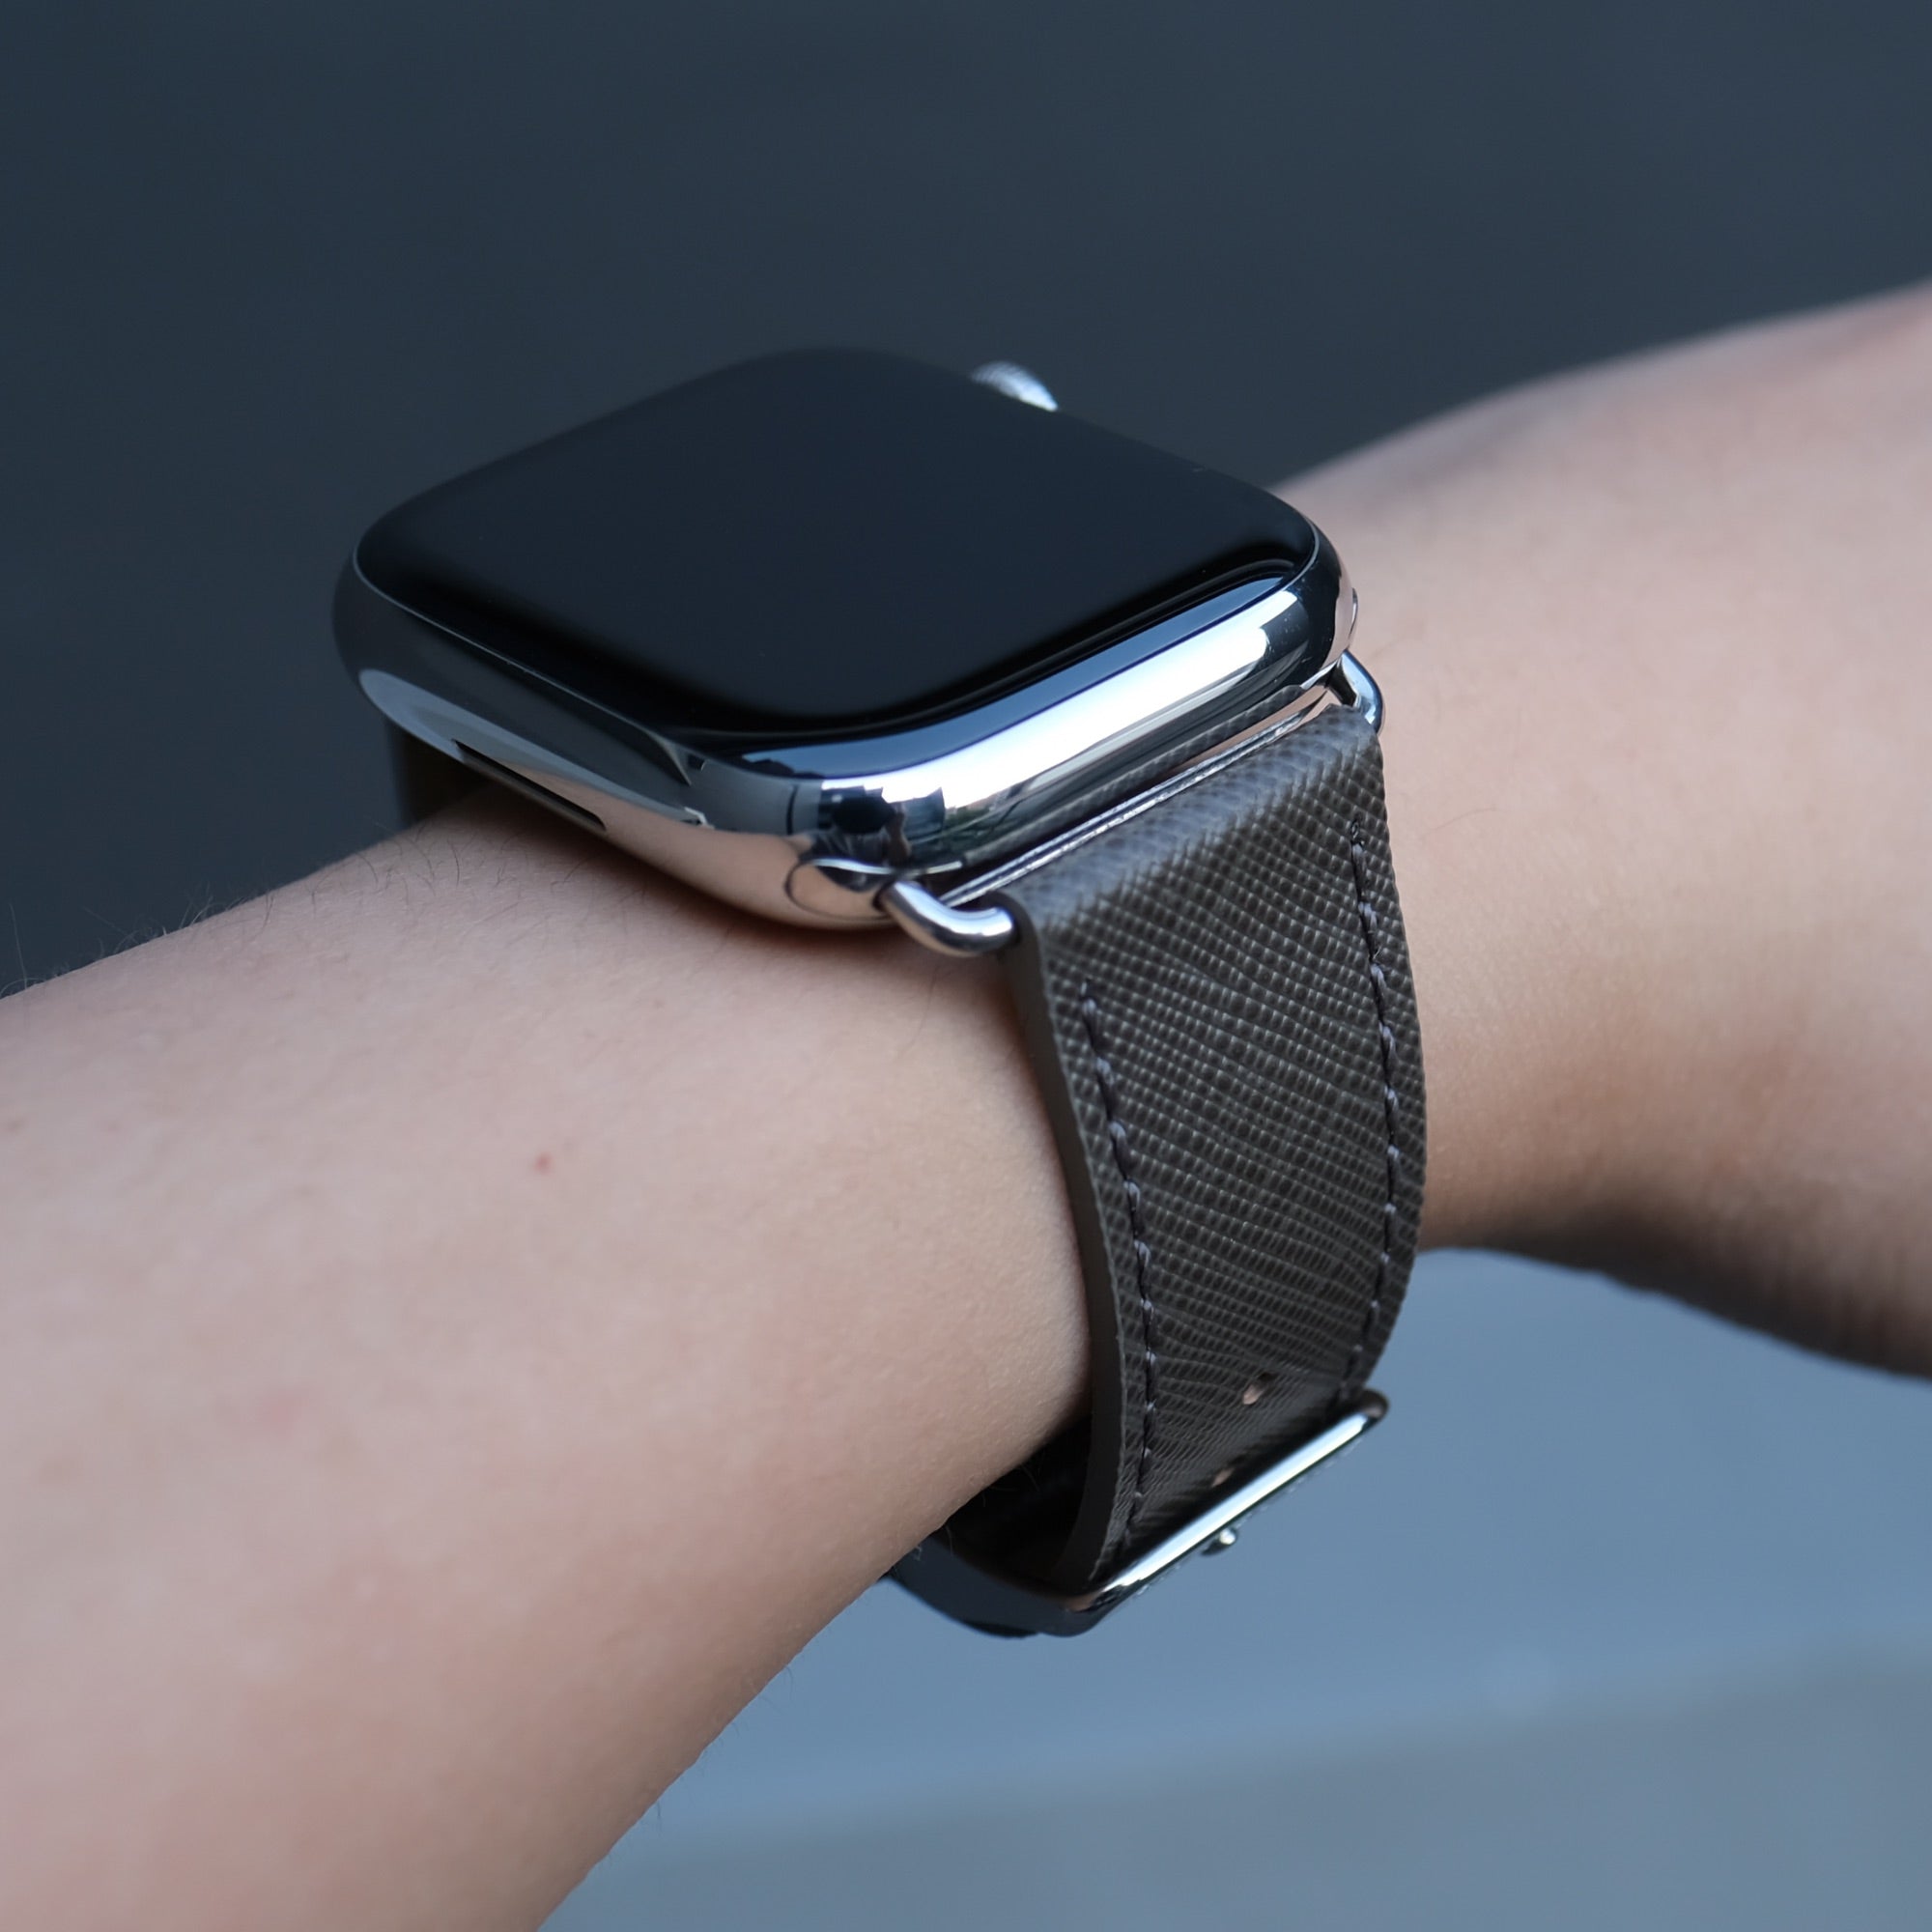 Apple Watch Strap Stainless Steel